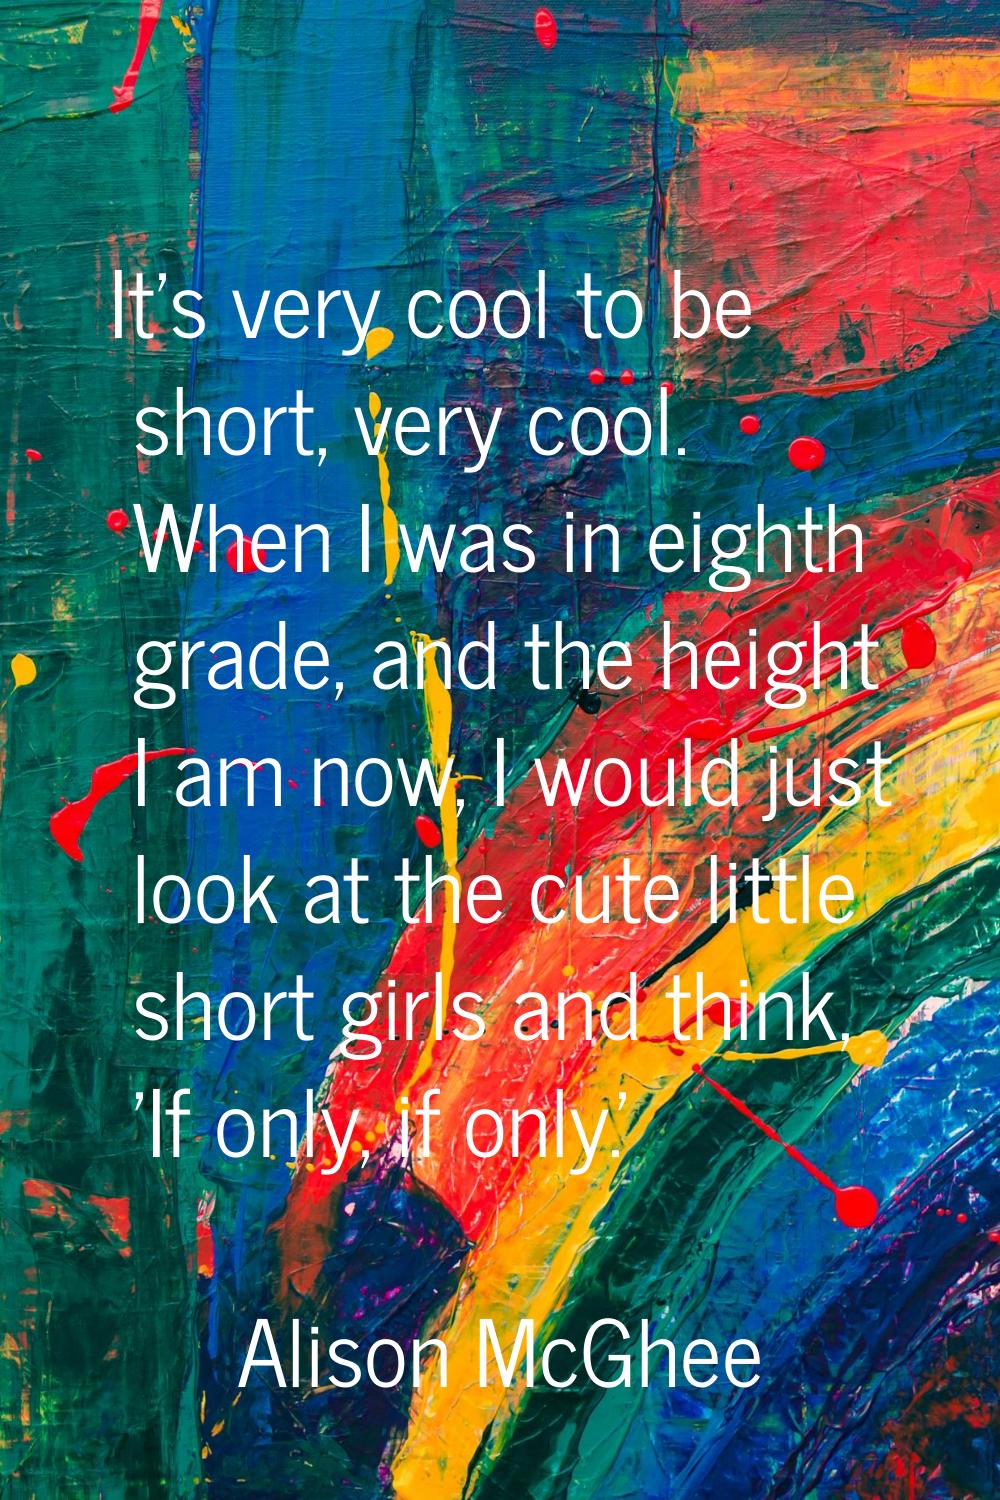 It's very cool to be short, very cool. When I was in eighth grade, and the height I am now, I would